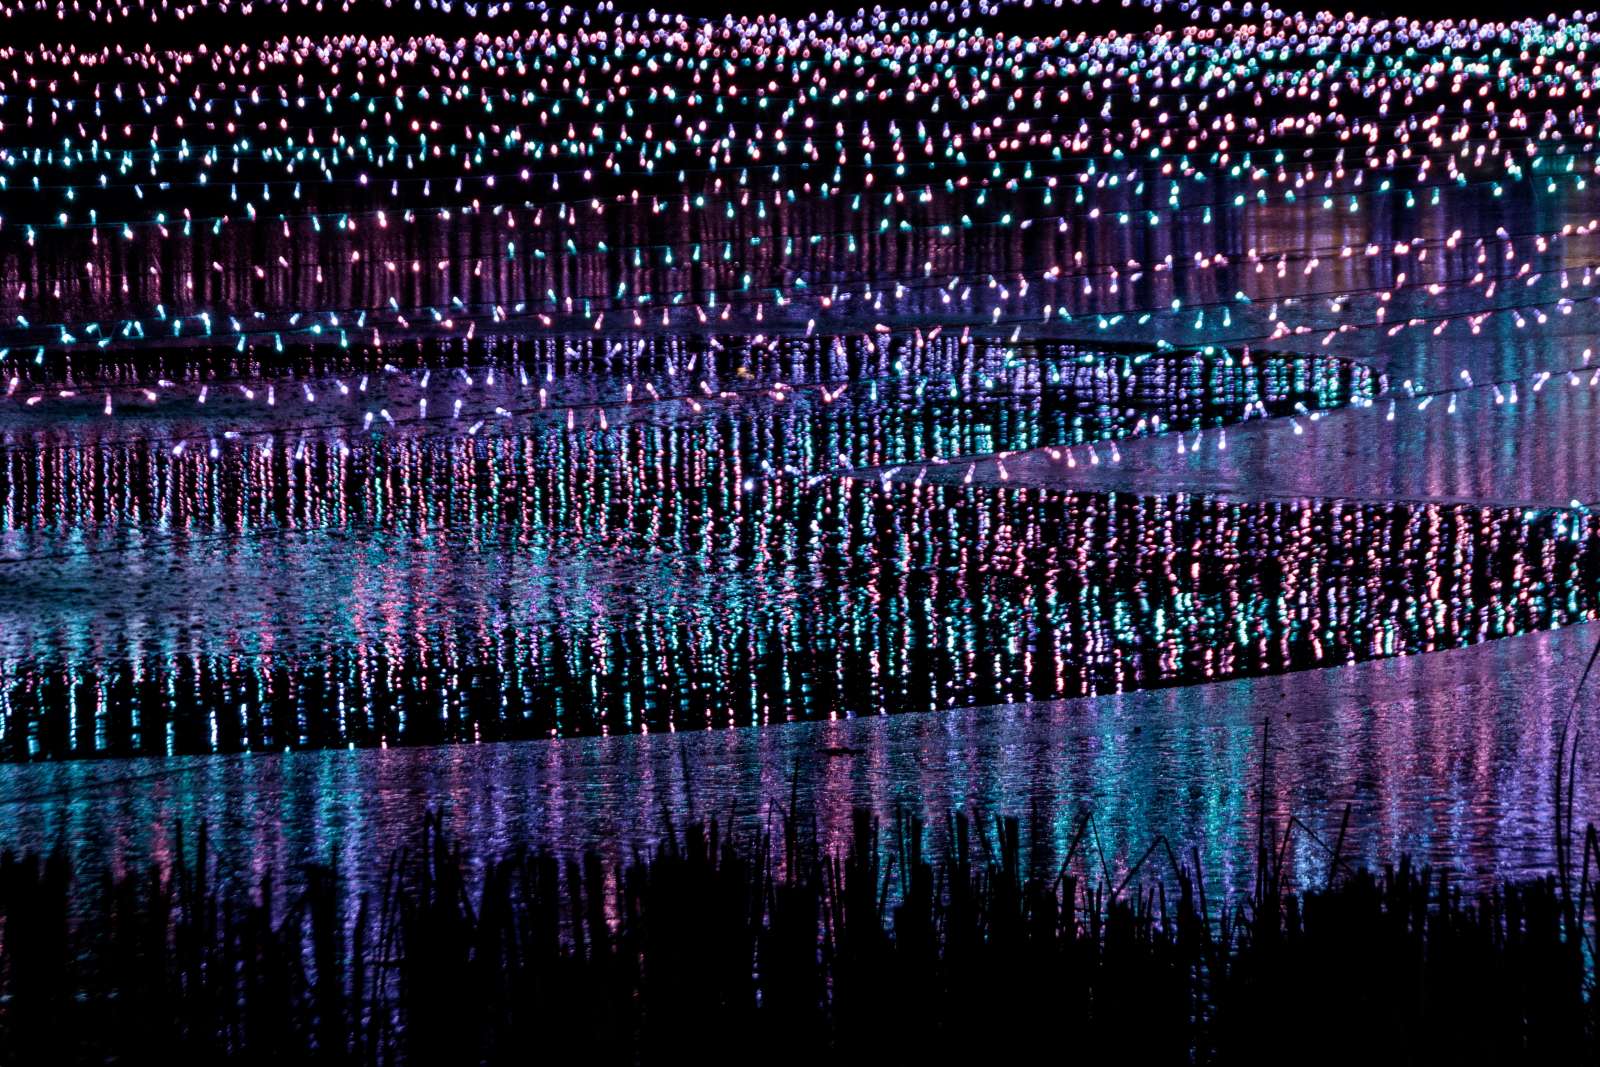 pink, purple, and white lights twinkle and reflect against the black night waters of Lake Helen.